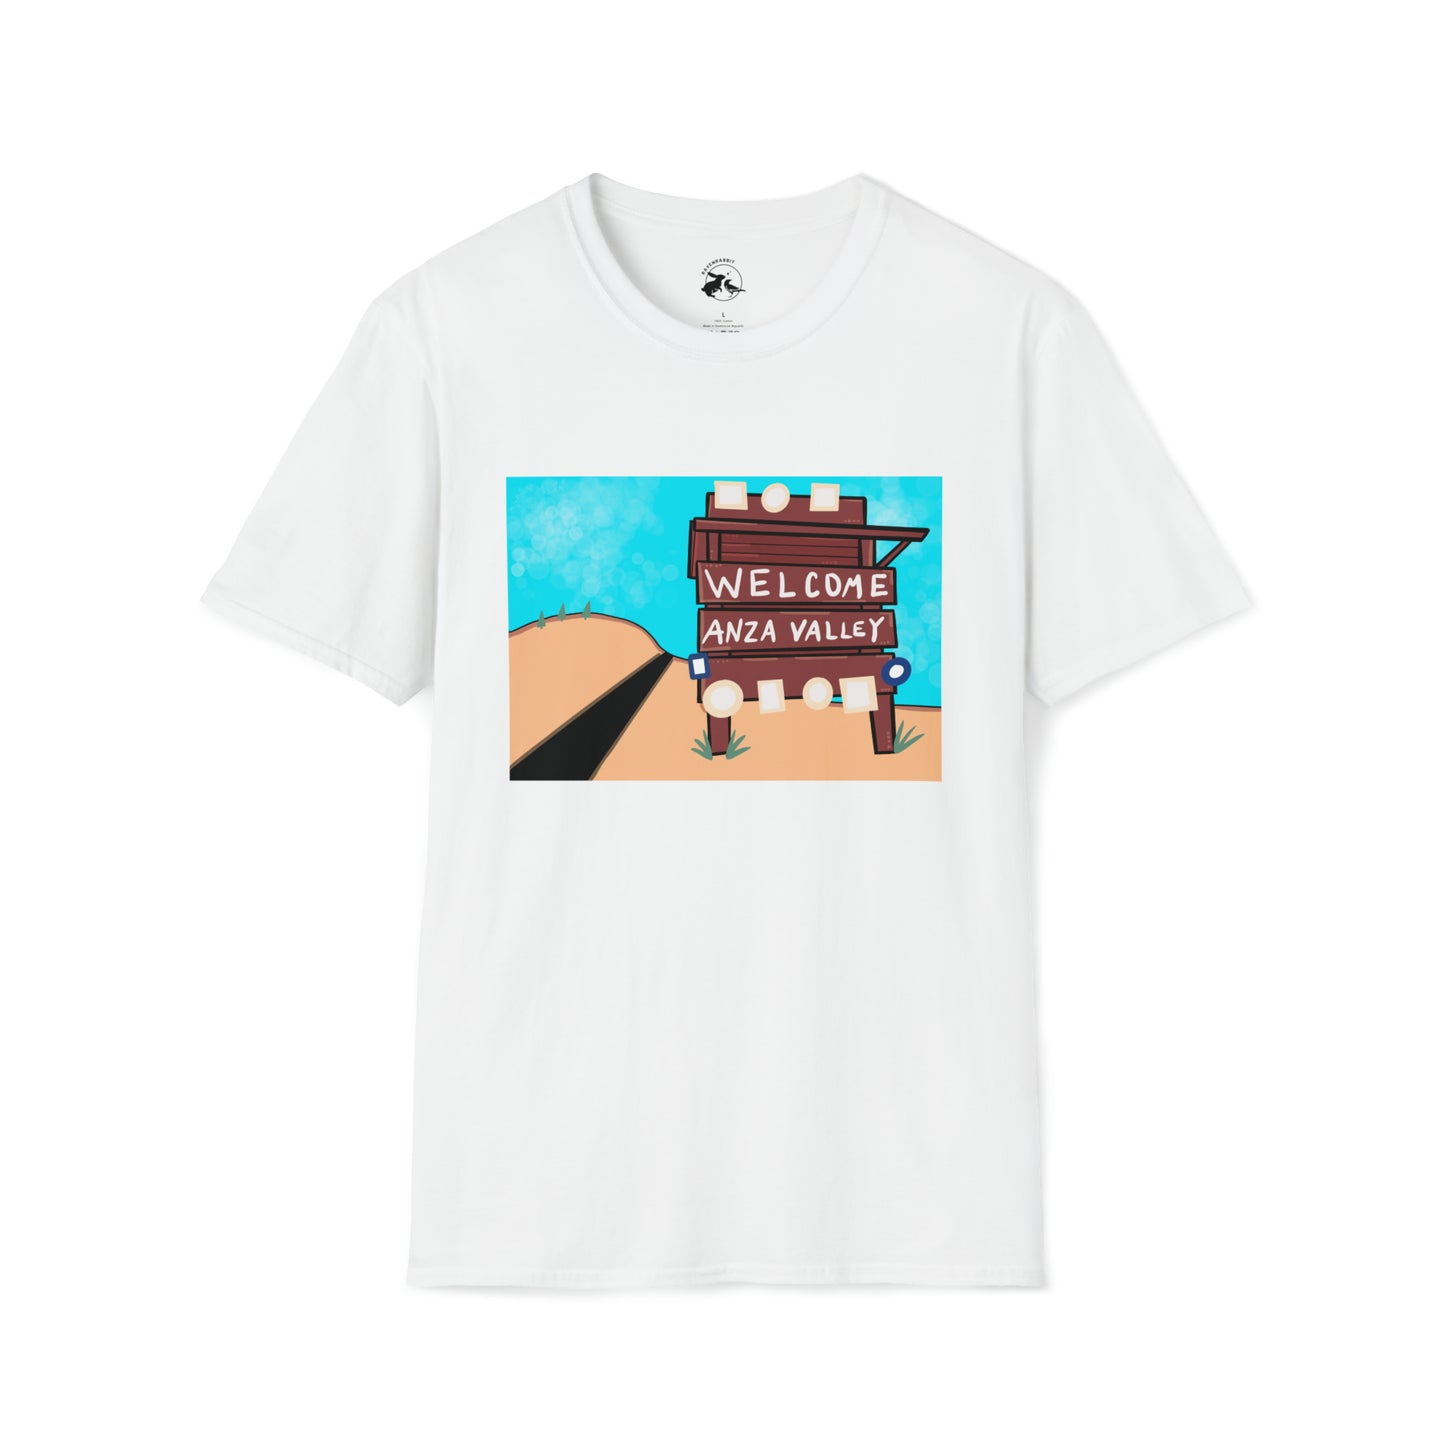 Anza Valley Welcome T-Shirt